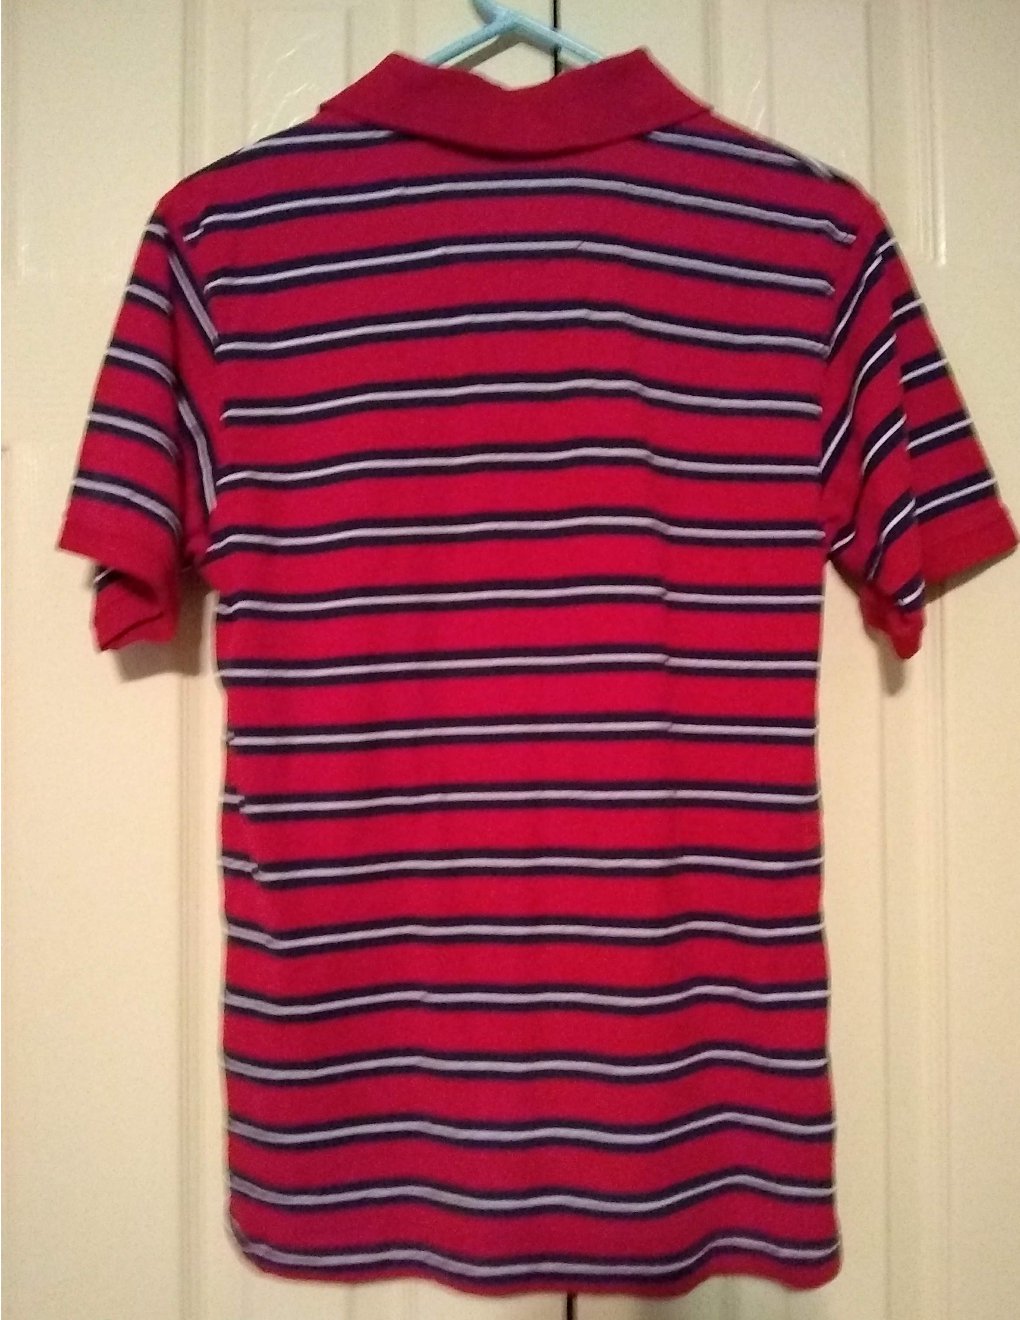 NEW Faded Glory Boys Vintage Wash Striped Polo Golf Style Shirt XL or ...